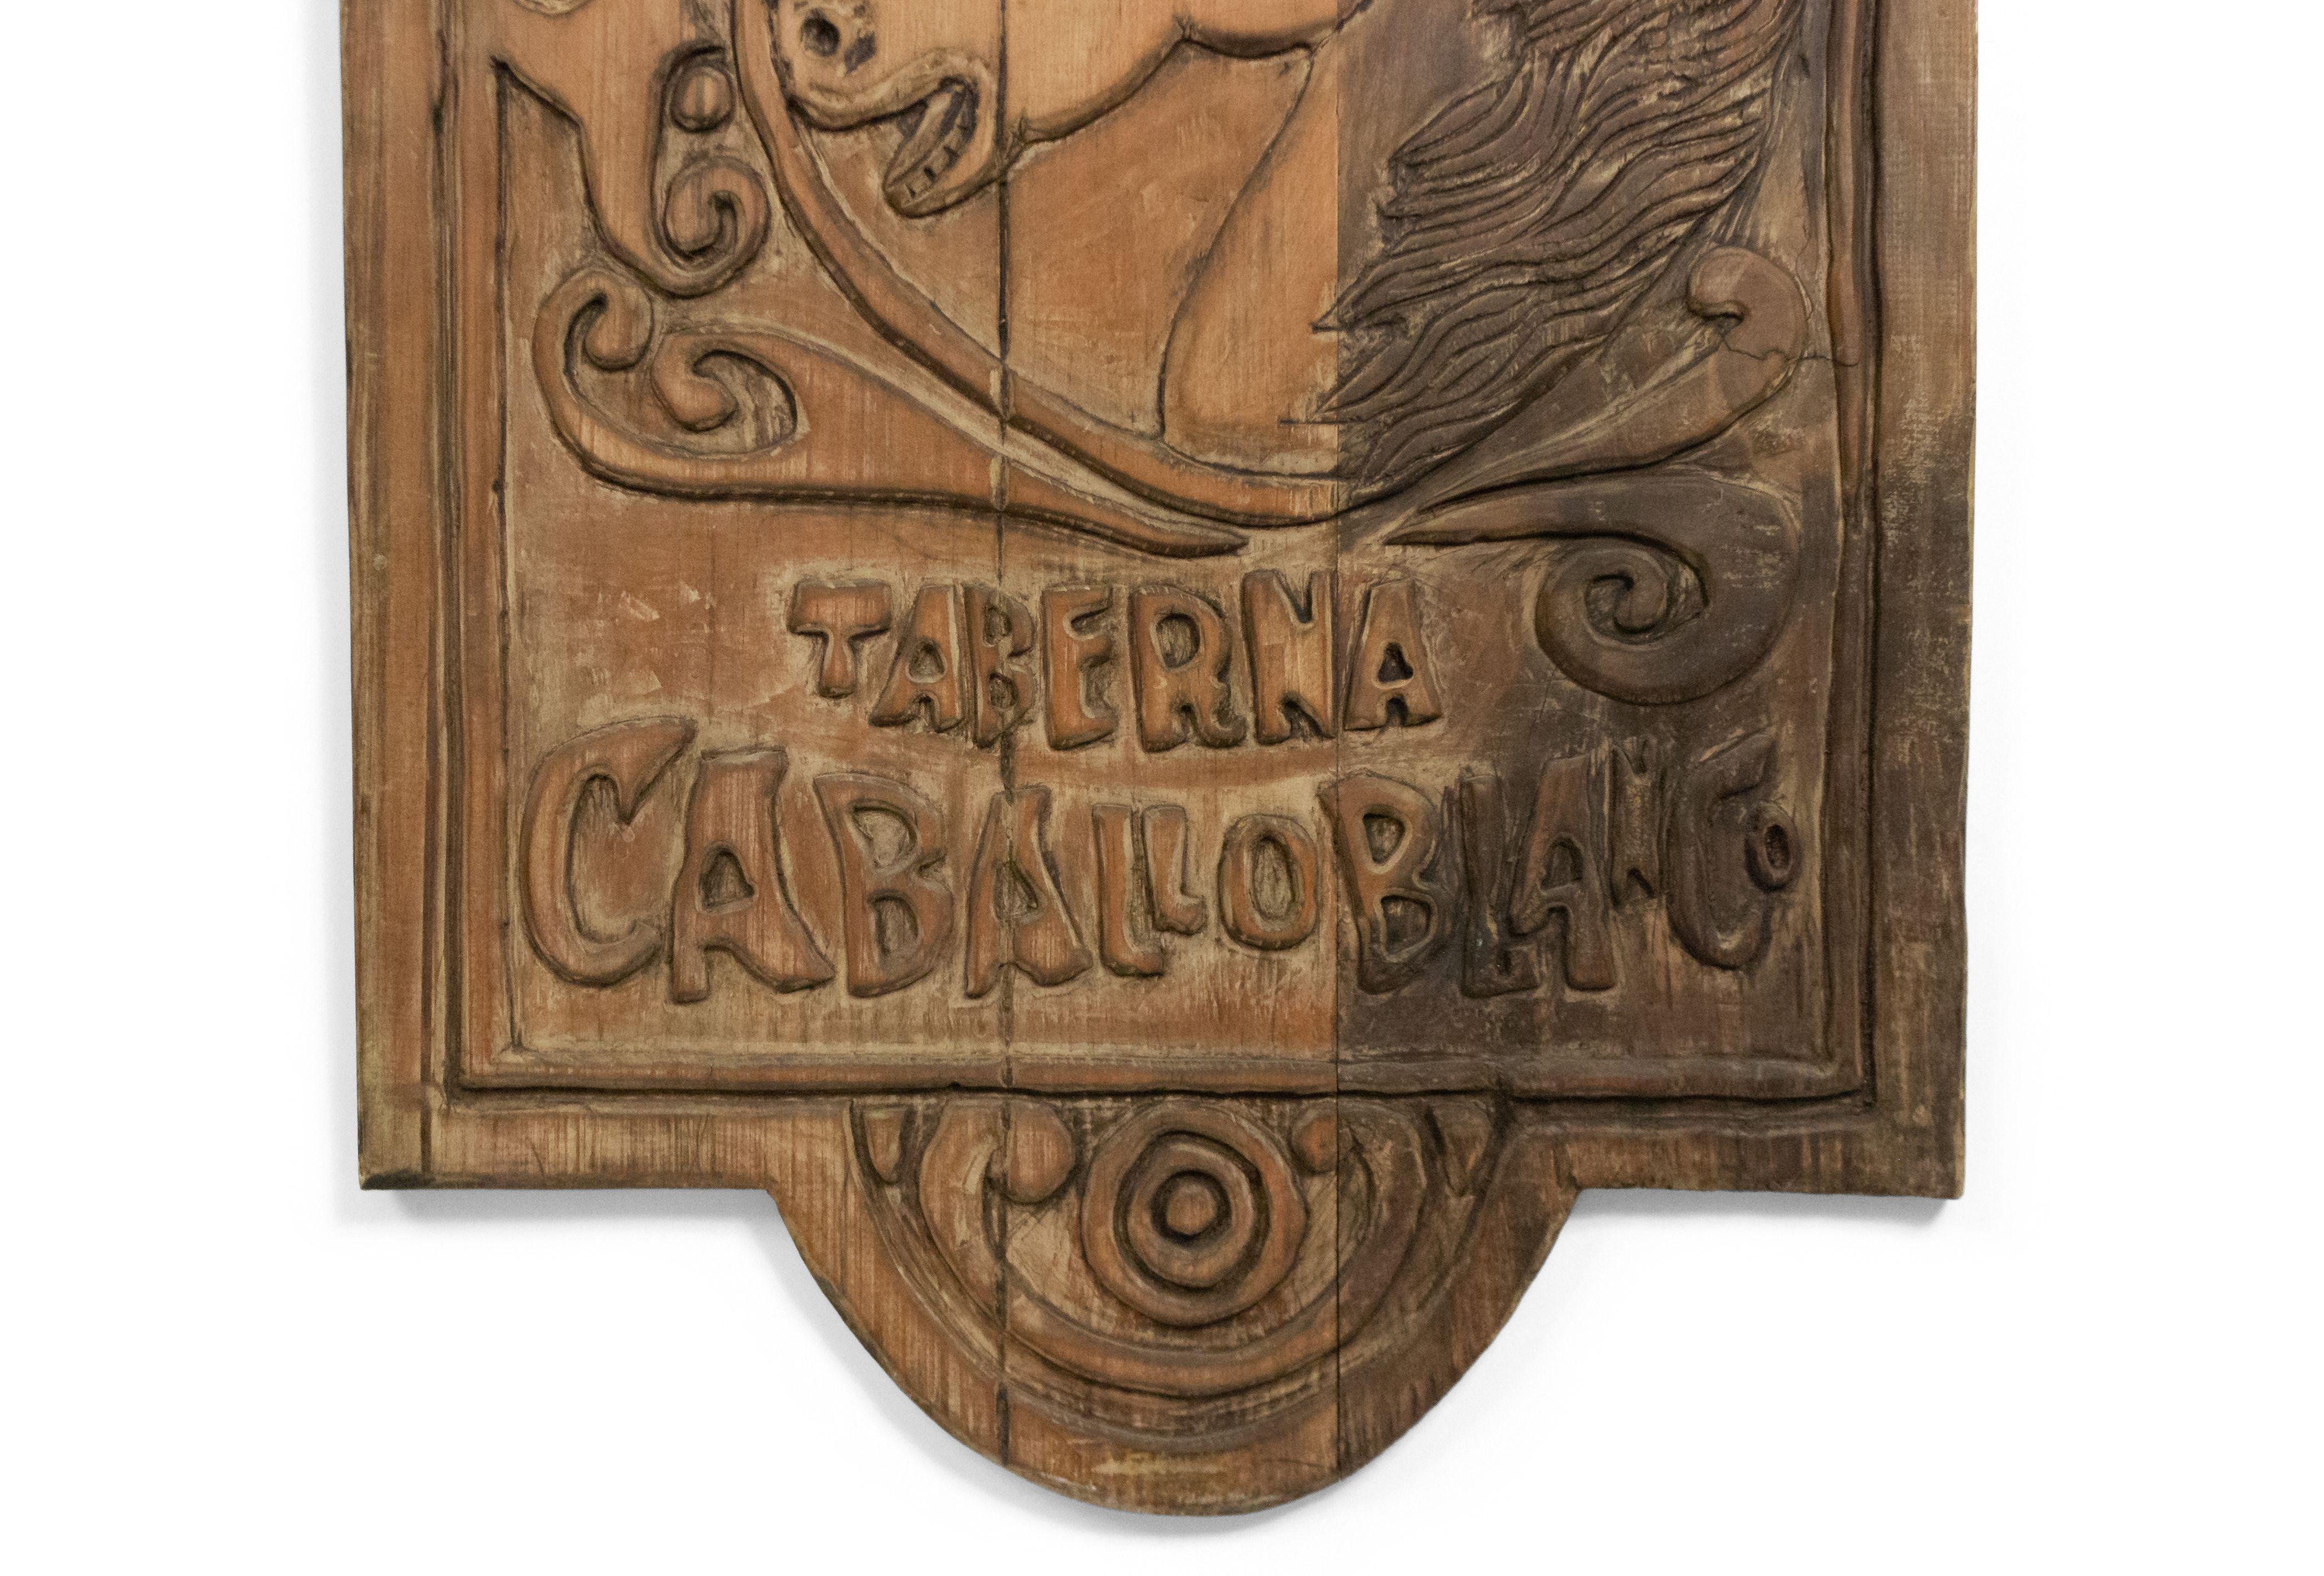 Spanish Provincial (20th Cent) style painted and carved horse head wall plaque/sign (La Taberna Caballoblanco) (Related item: 049724D).
 